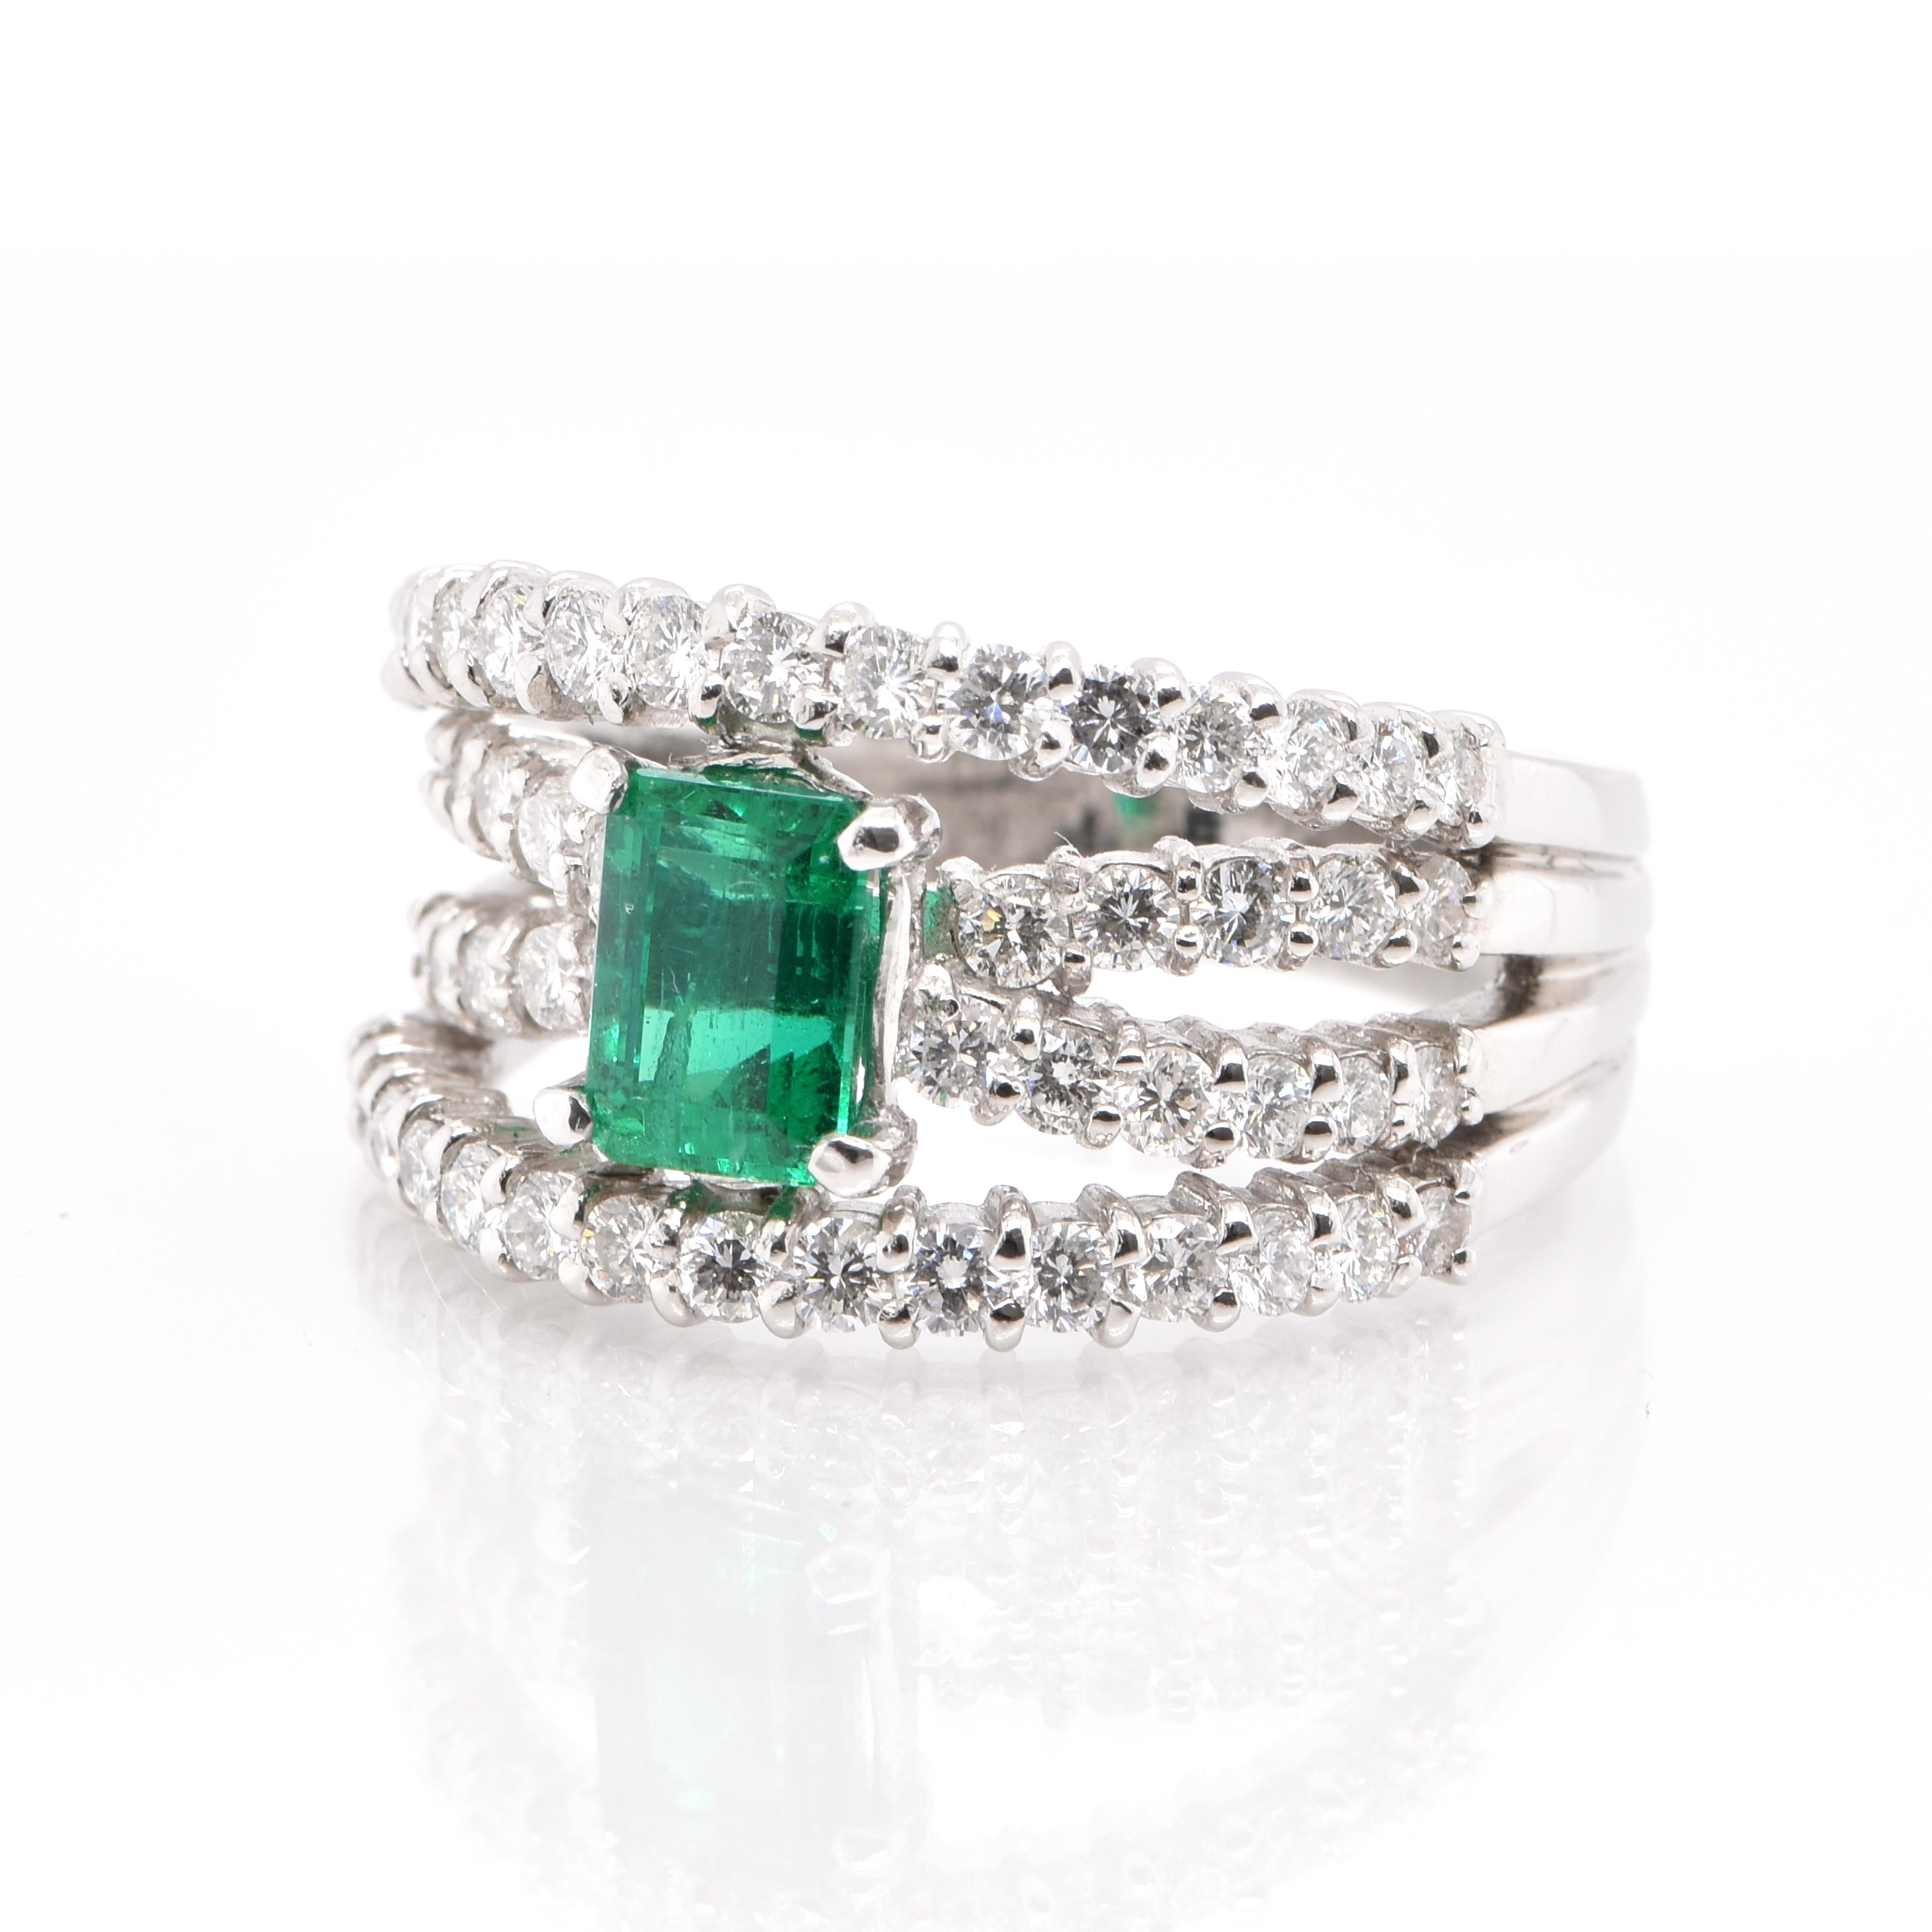 A stunning Ring featuring a 0.93 Carat, Natural, Colombian Emerald and 1.14 Carats of Diamond Accents set in Platinum. People have admired emerald’s green for thousands of years. Emeralds have always been associated with the lushest landscapes and